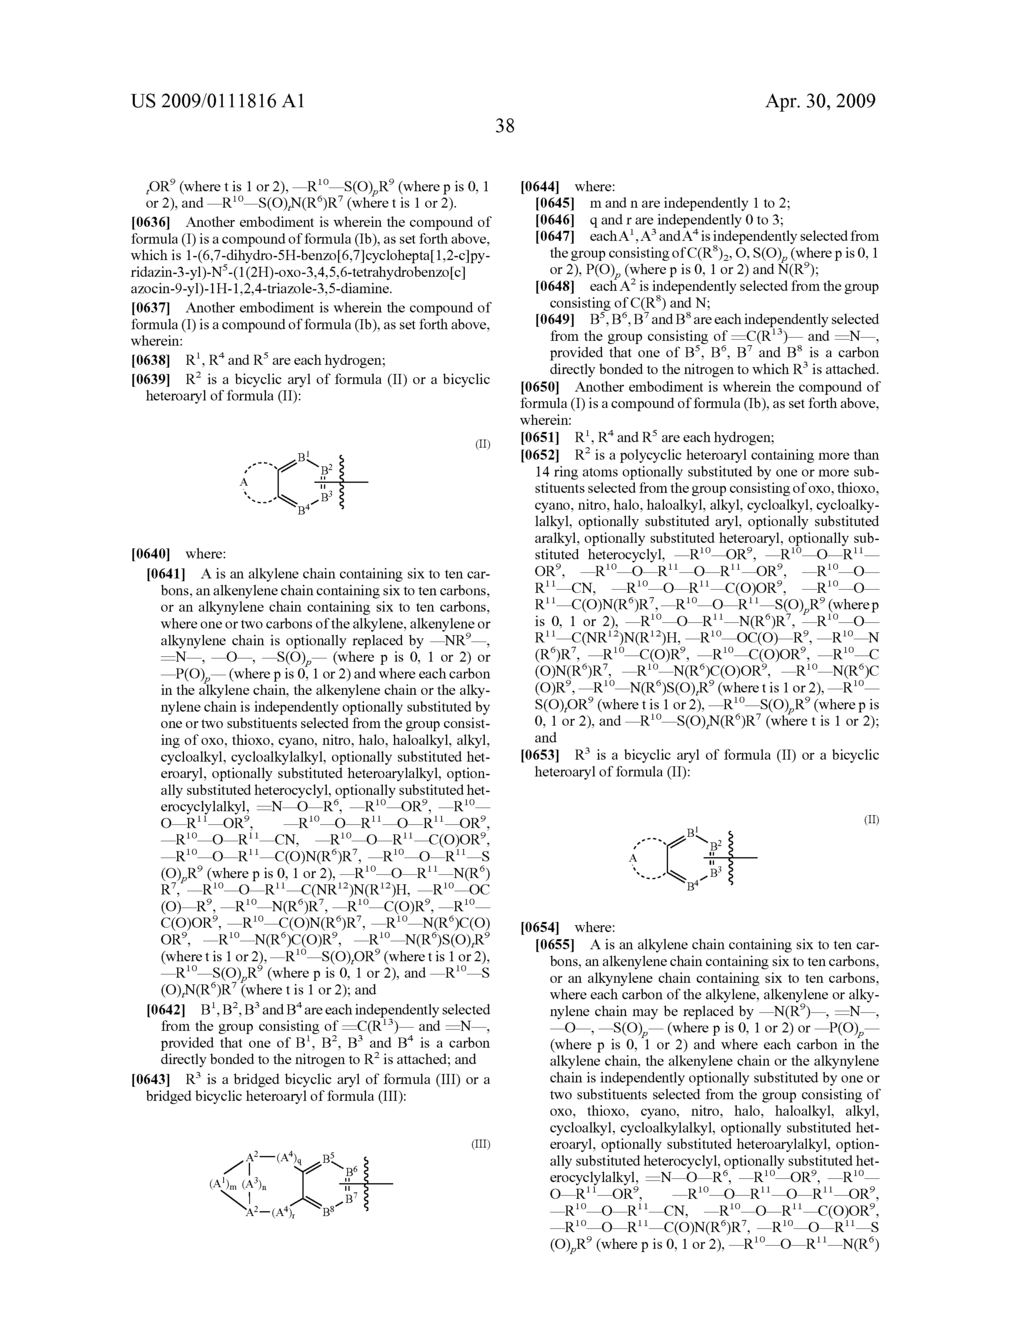 POLYCYCLIC ARYL SUBSTITUTED TRIAZOLES AND POLYCYCLIC HETEROARYL SUBSTITUTED TRIAZOLES USEFUL AS AXL INHIBITORS - diagram, schematic, and image 39